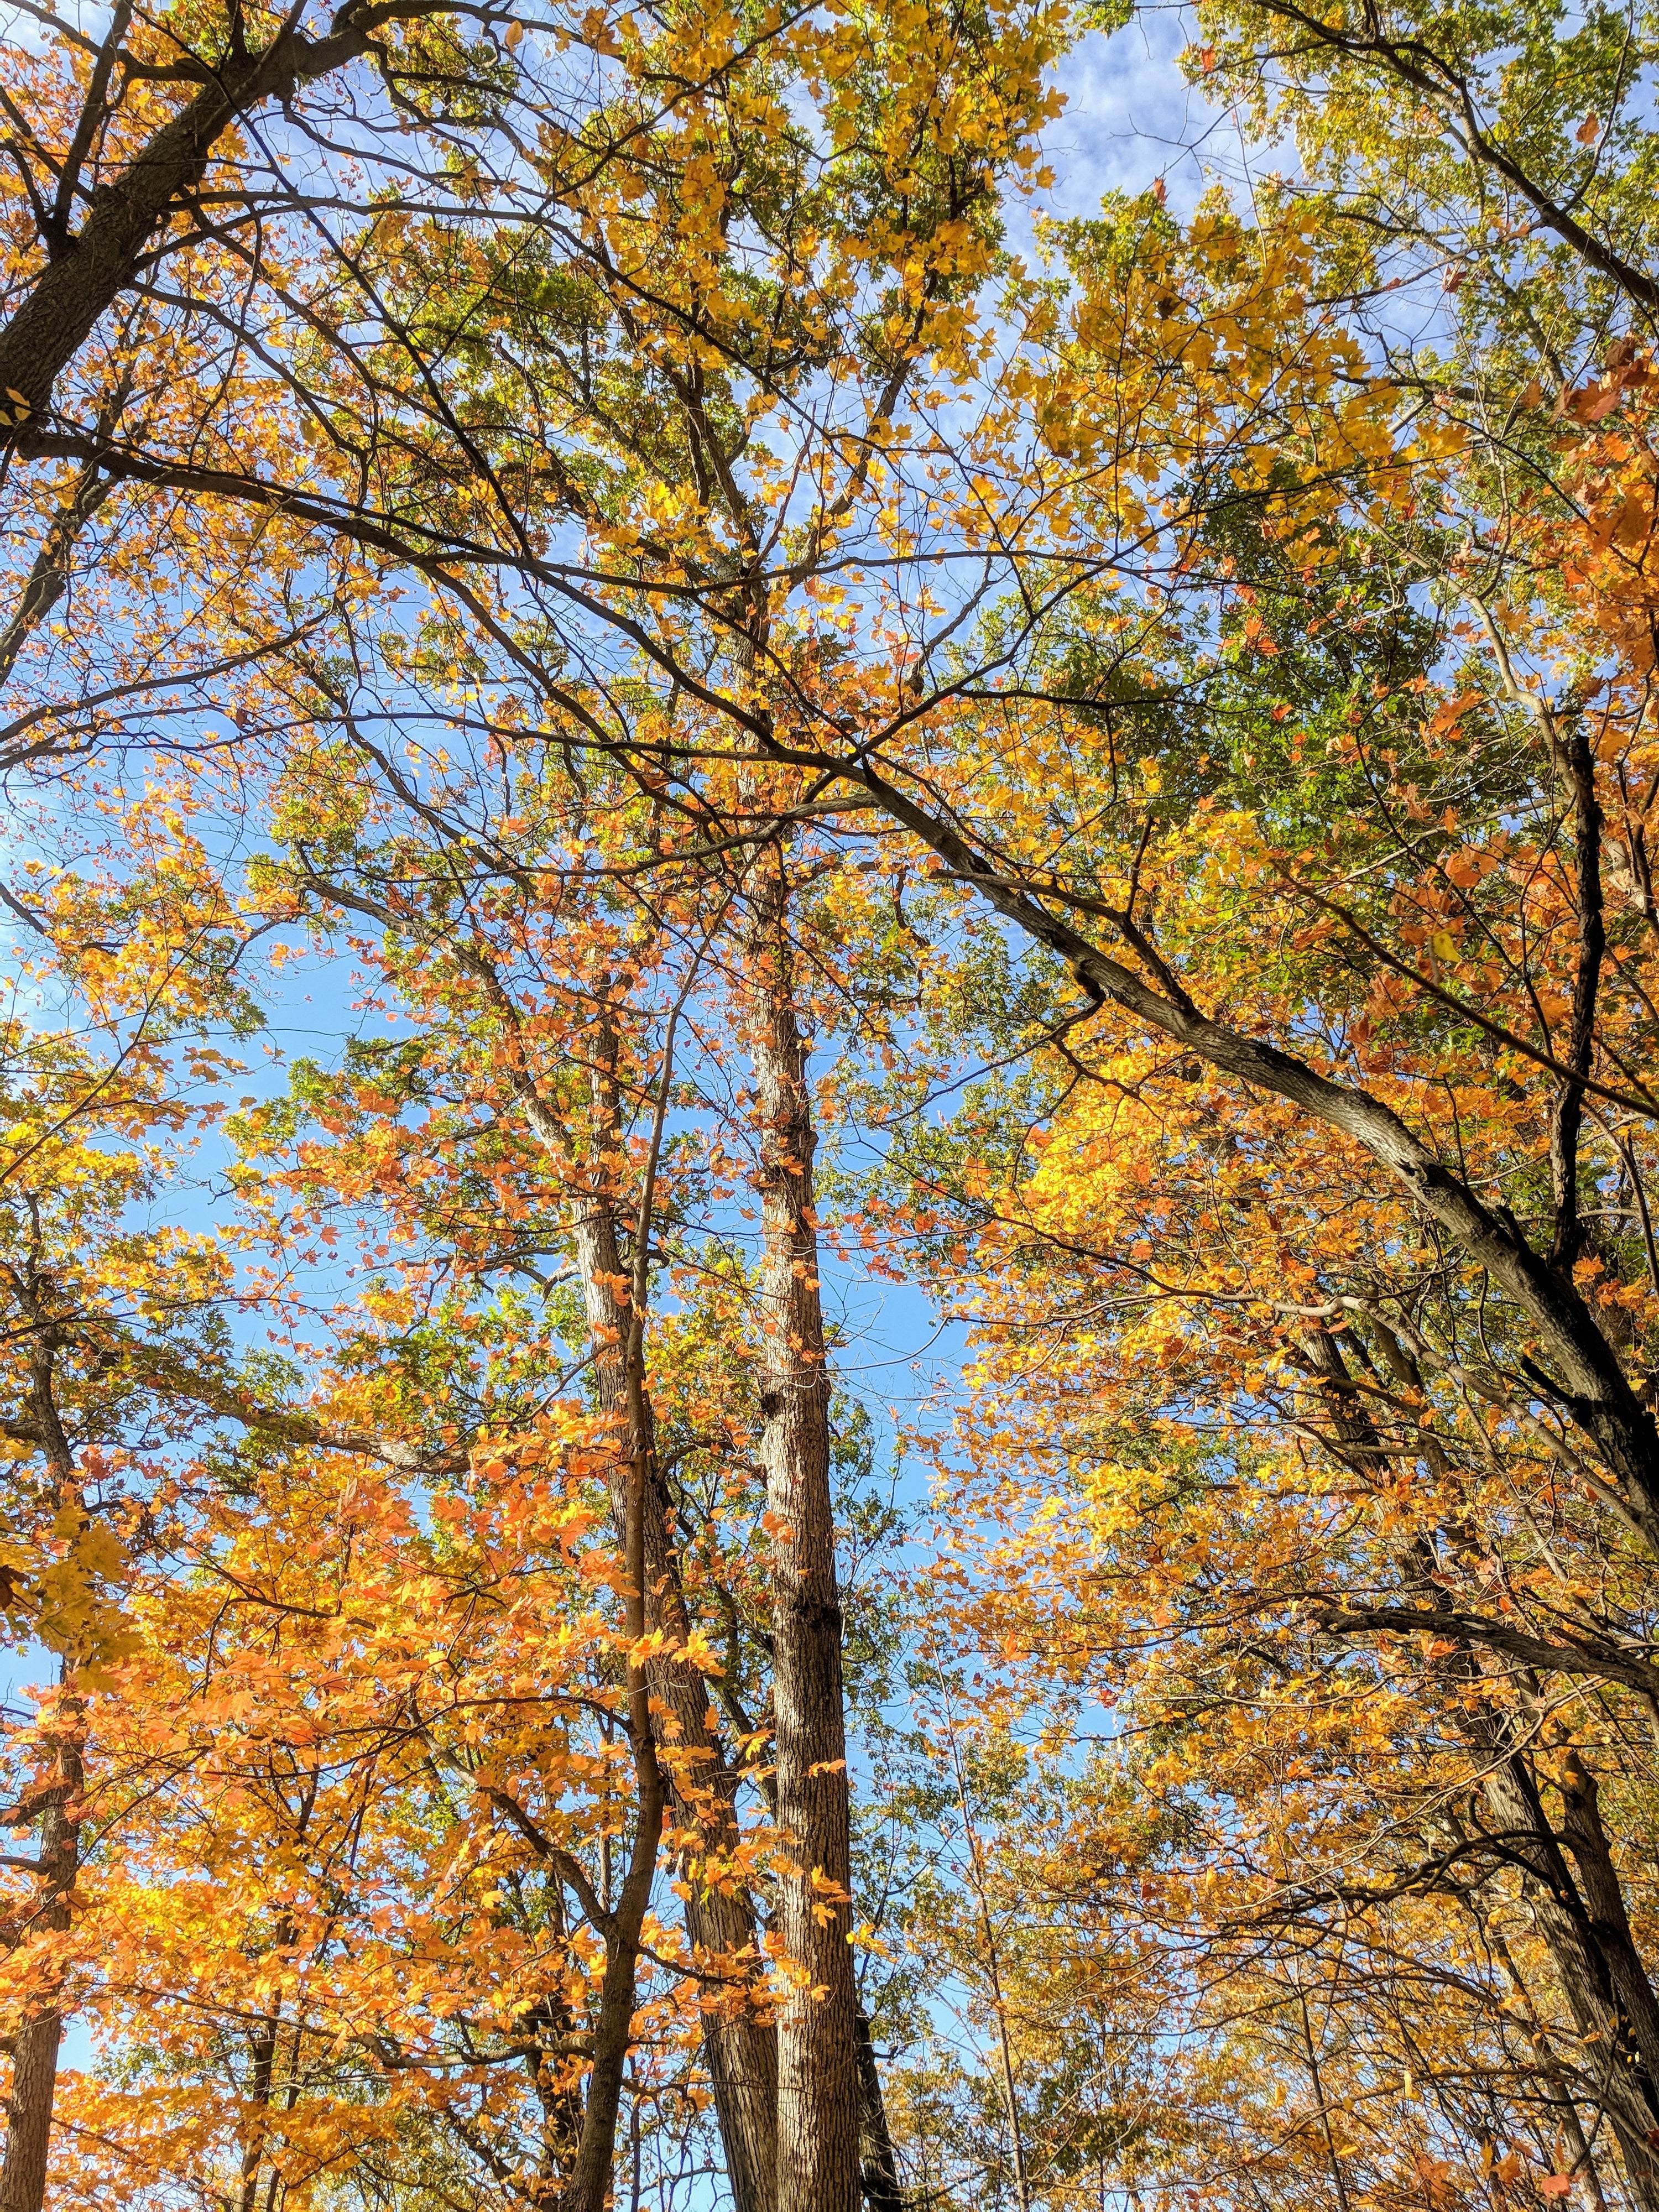 colorful autumn leaves on tall trees and blue sky showing above